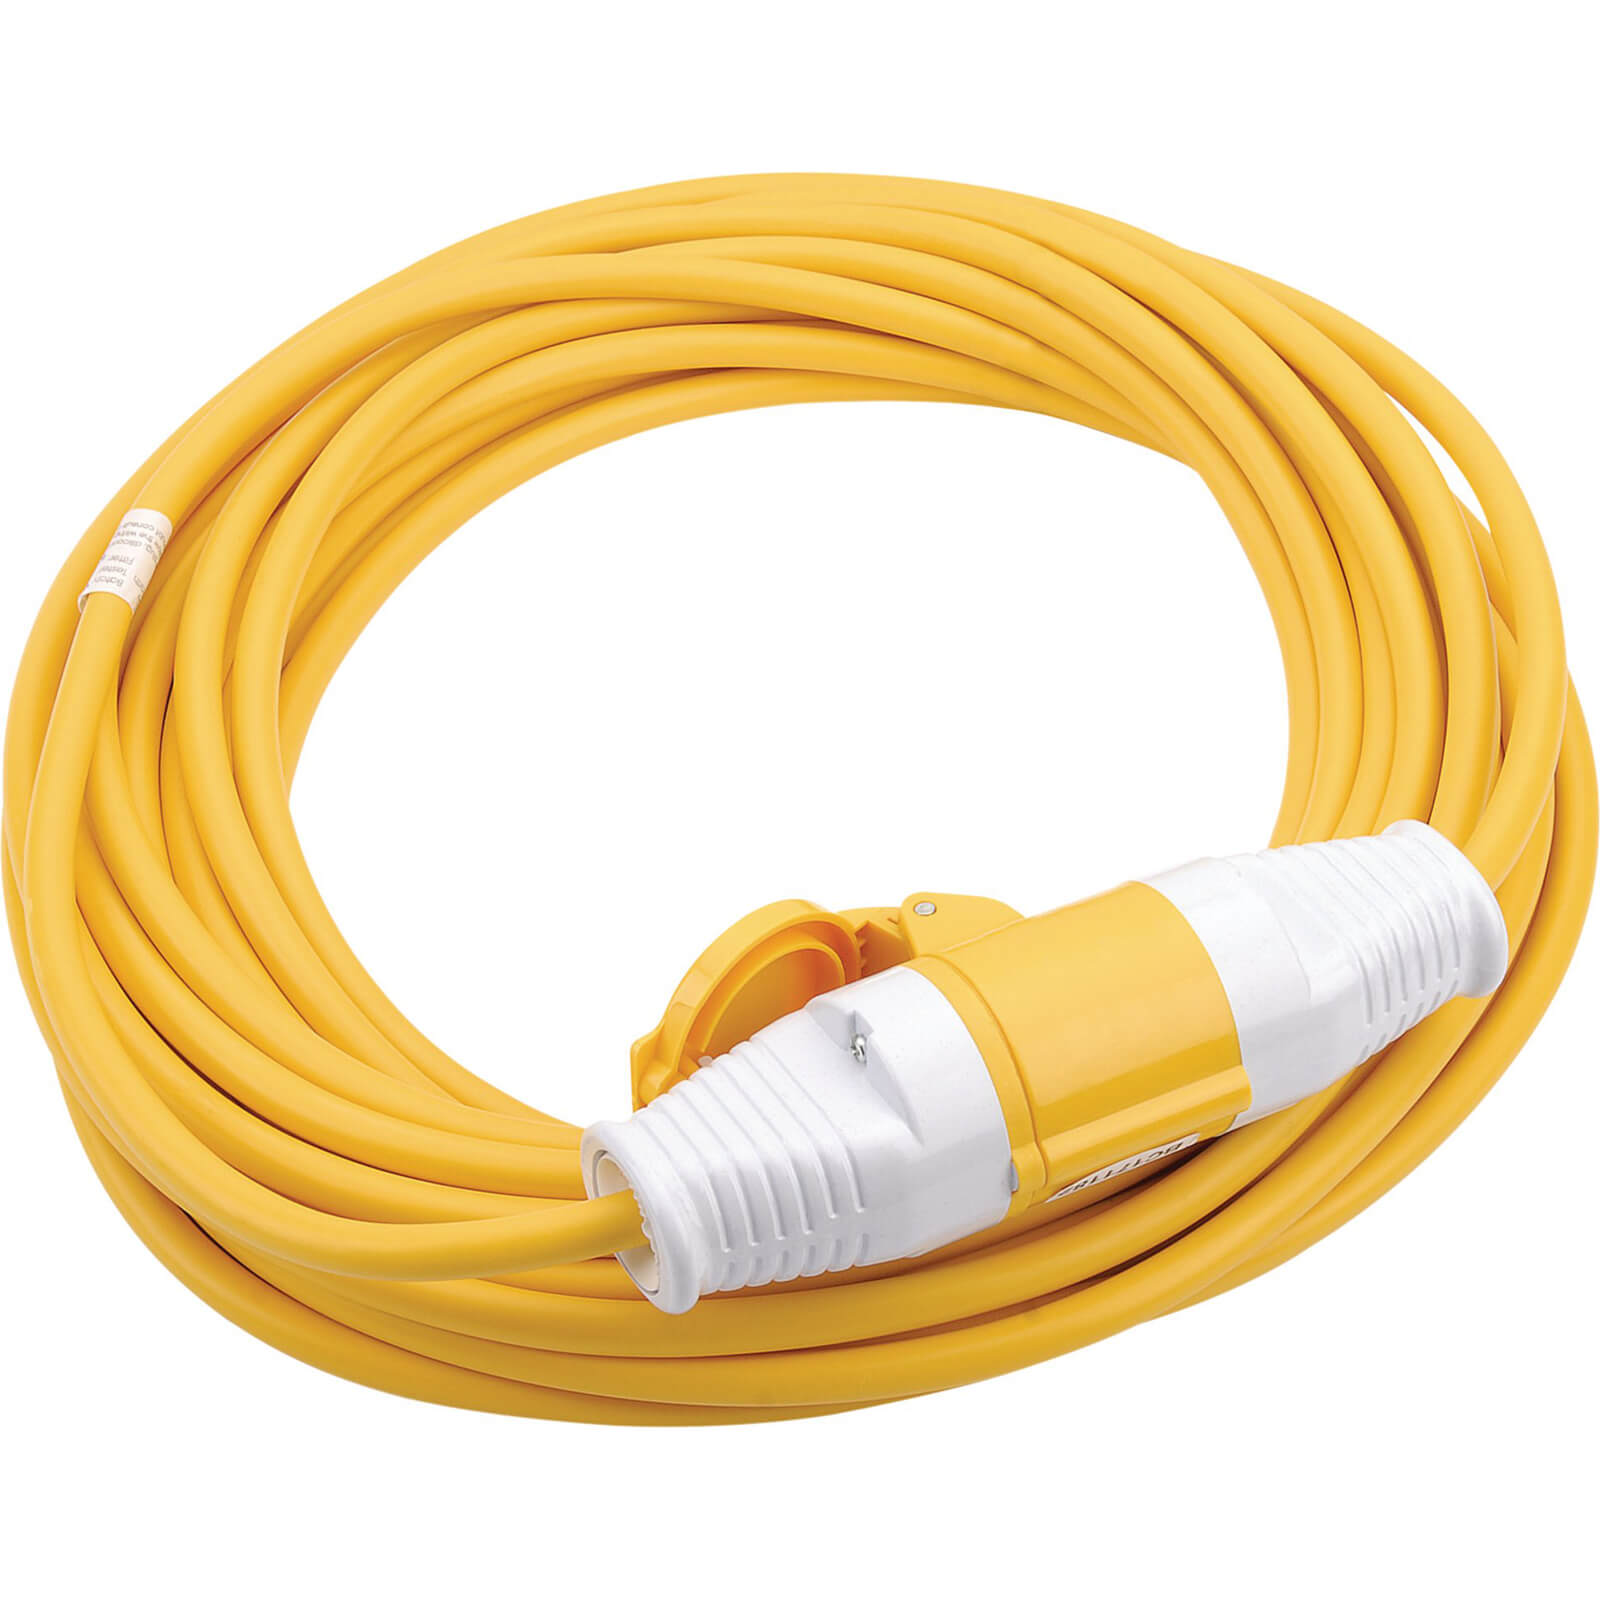 Image of Draper Extension Trailing Lead 32 amp 2.5mm Yellow Cable 110v 14m